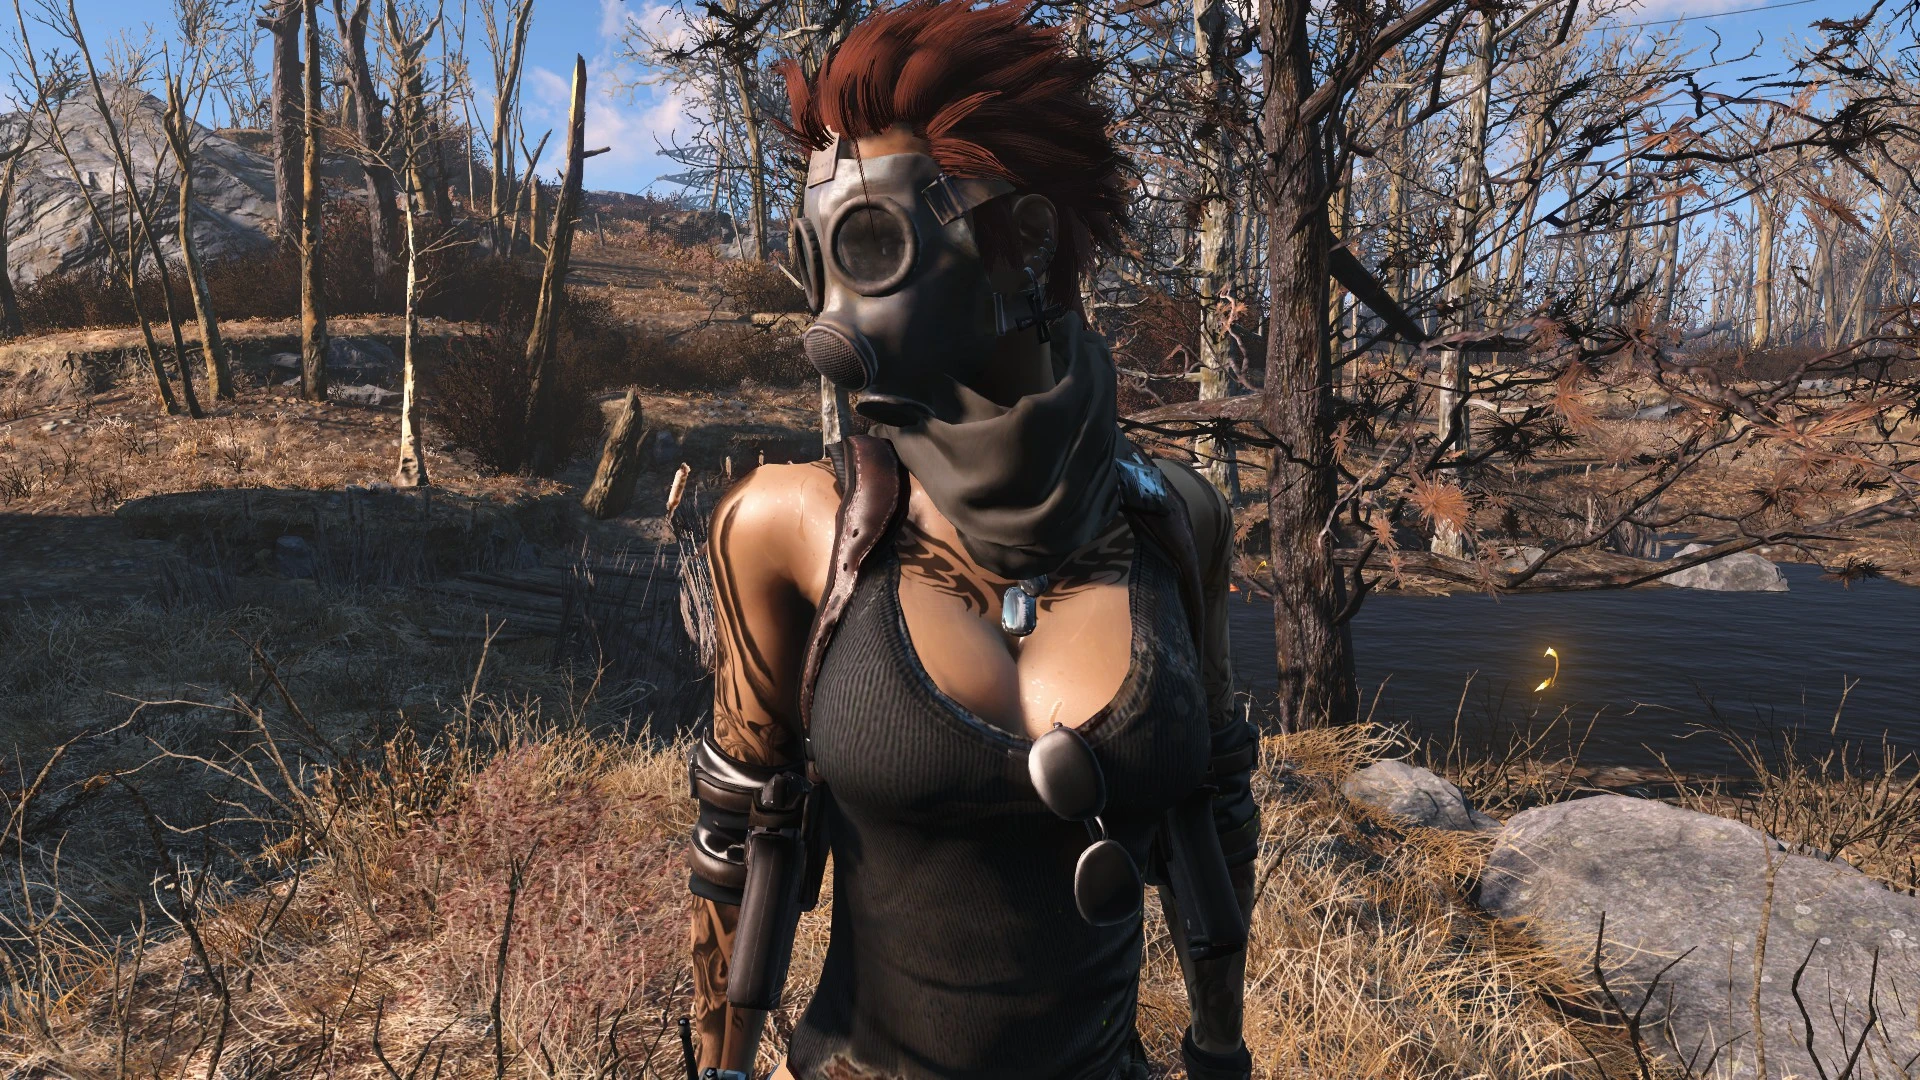 Gallery of Fallout 4 Mods Cait Feet.